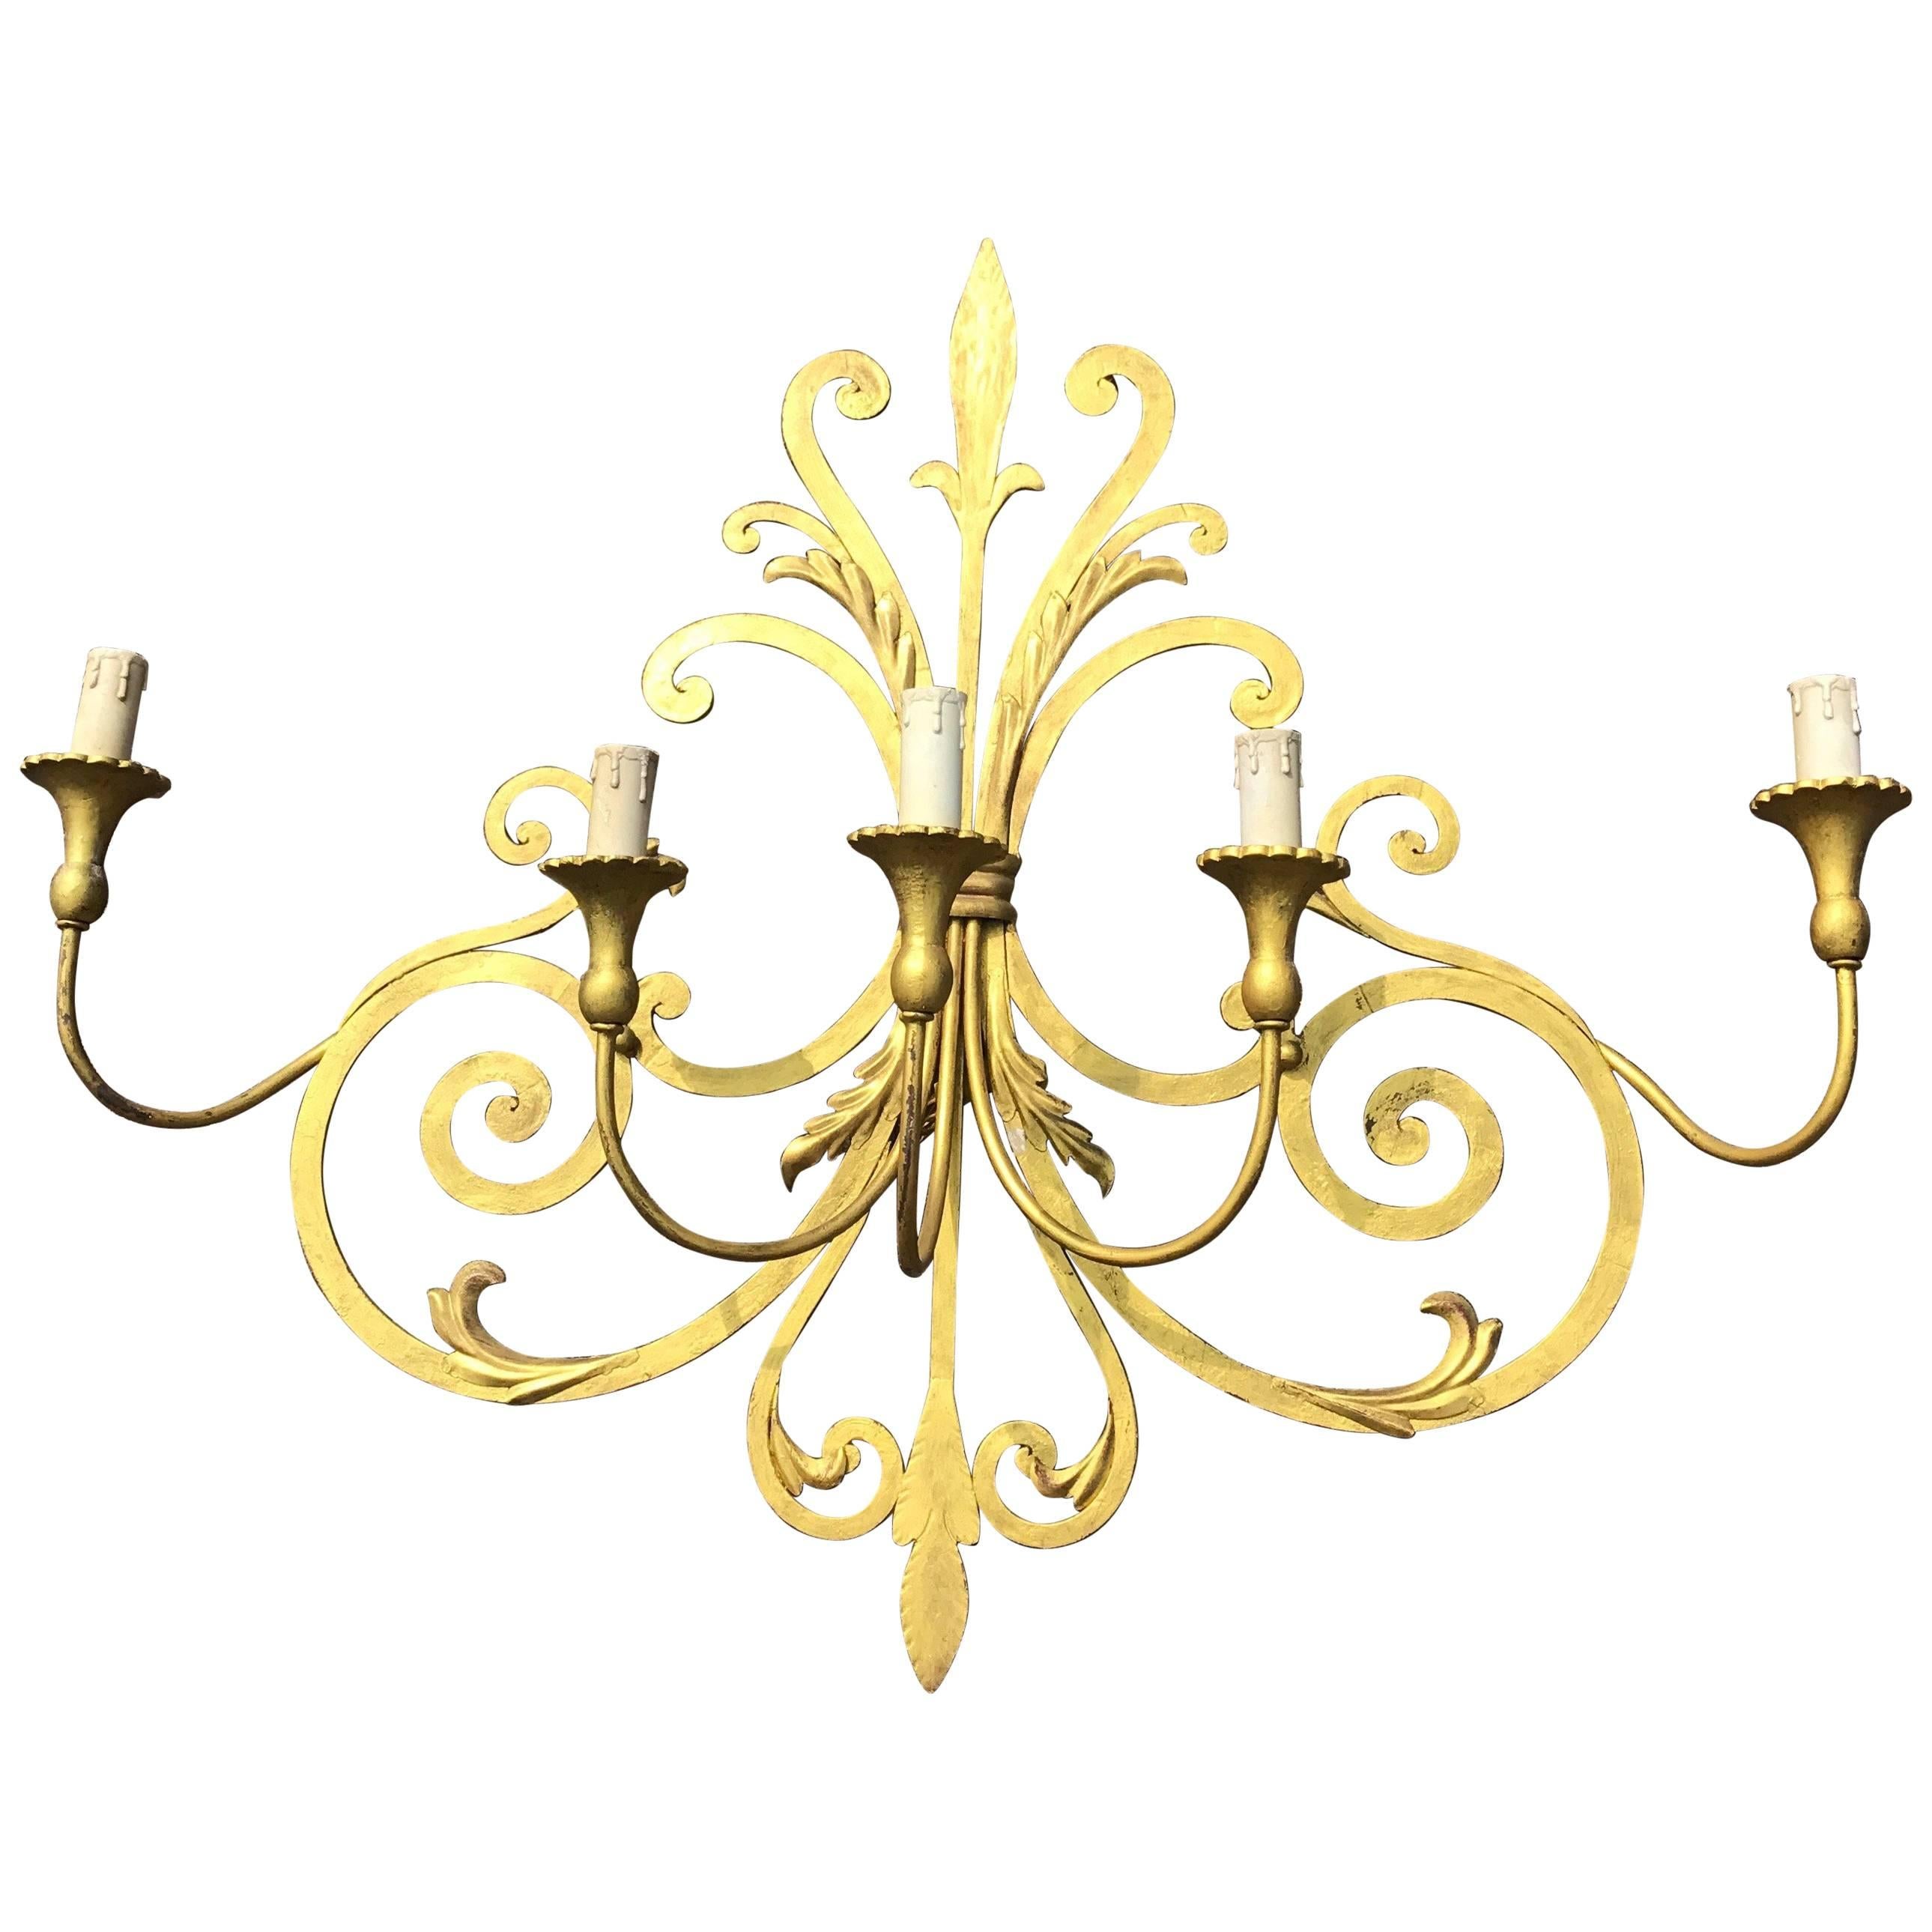 Large Wrought Iron Five-Light Single Wall Sconce Labelled Palladio, Italy